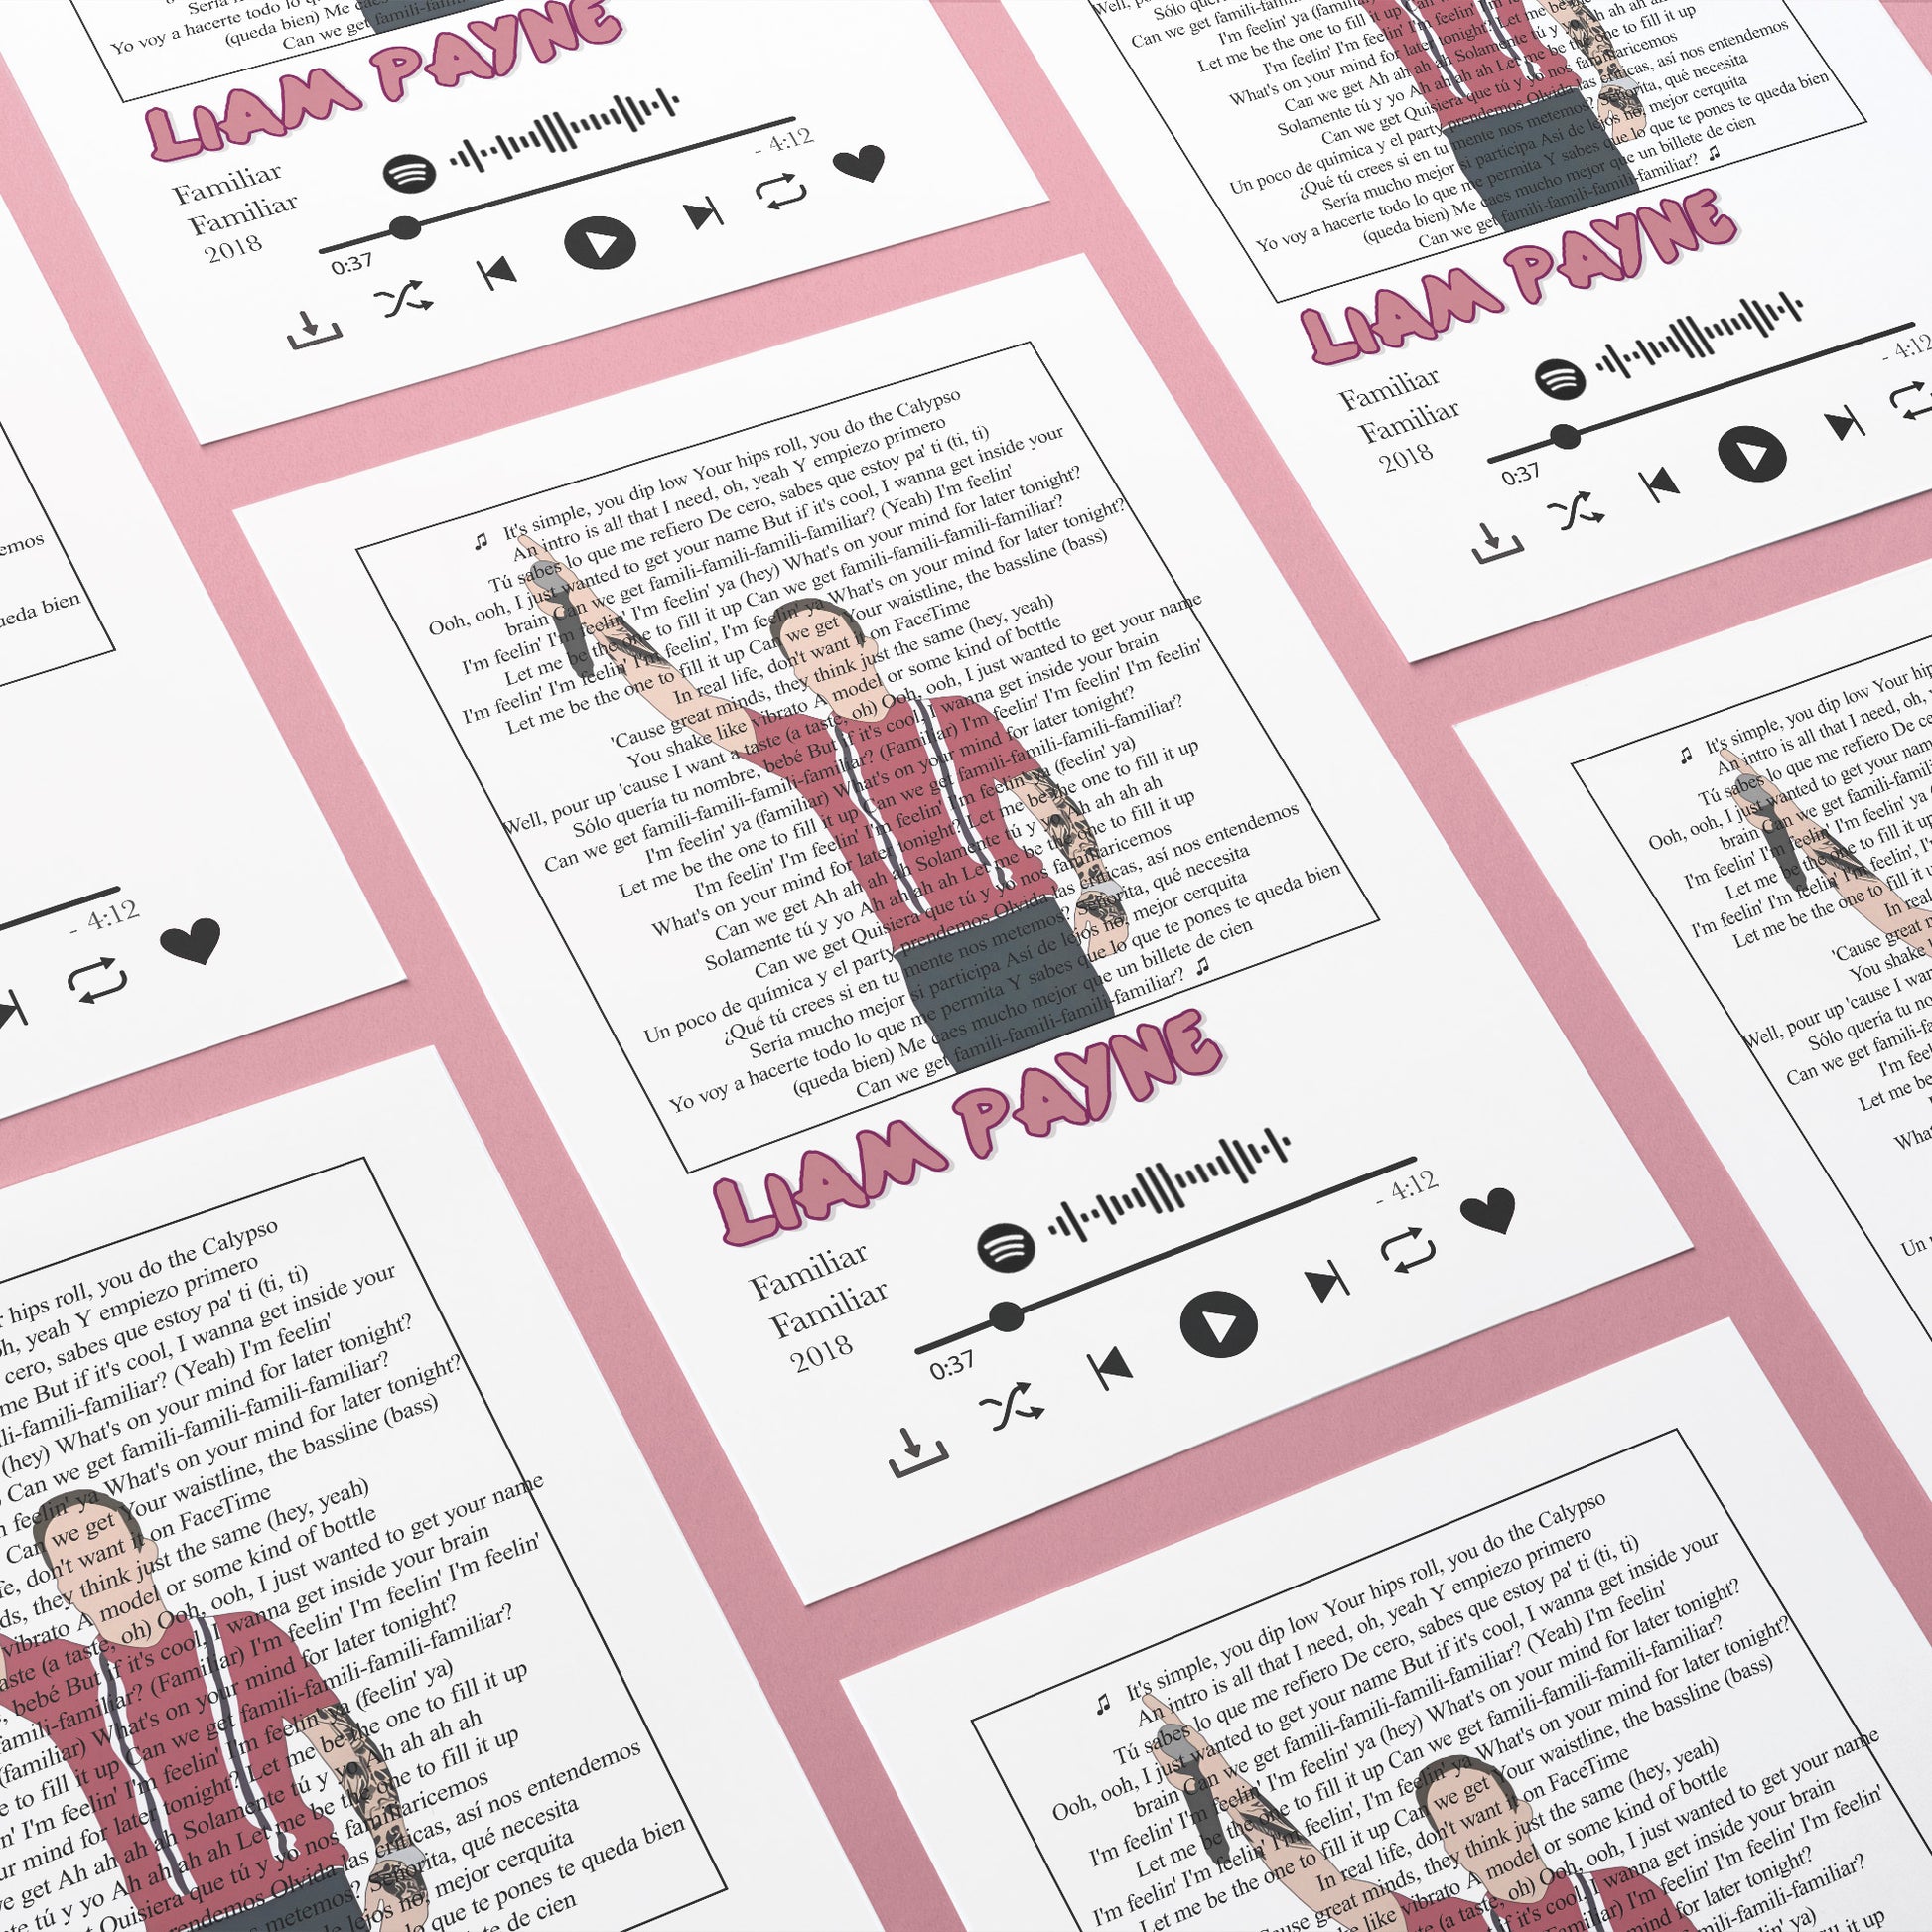 Brighten up any room with these personalised 'Familiar' Liam Payne lyric prints! Customize the frame and song lyric to make a perfectly unique gift for any music lover. Get creative and make your lyrics come to life – the possibilities are endless! #songlyricsarelife